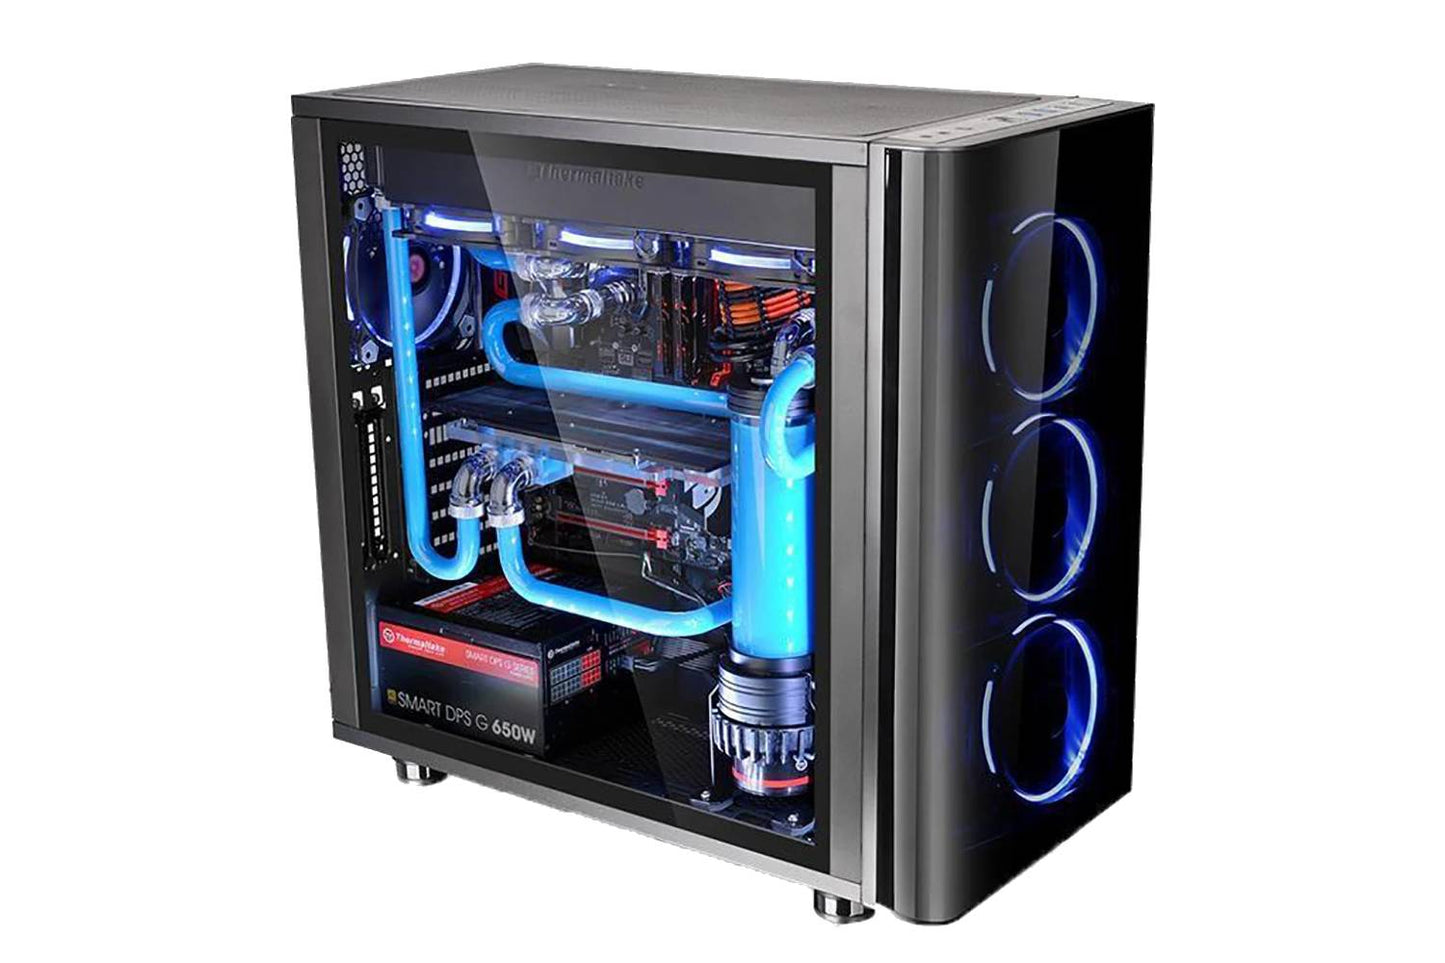 Thermaltake View 31 Tempered Glass Edition Cabinet